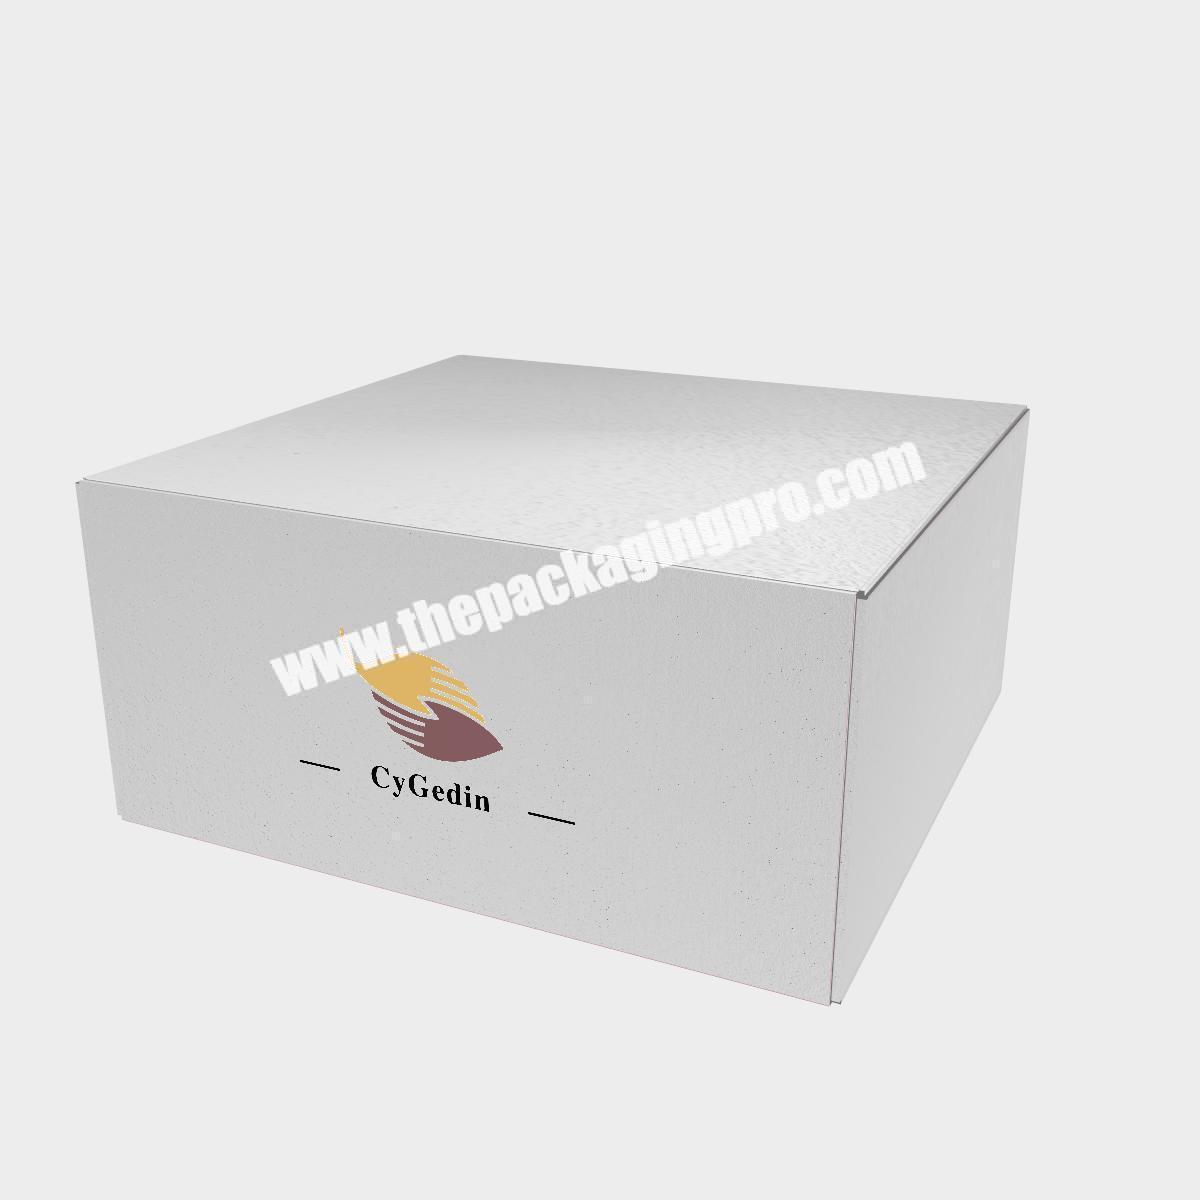 Wholesale Carton Corrugated Paper Packaging Shipping Box Mailer Foldable Gift Boxes Cardboard Gift & Craft Accept,accept Cygedin